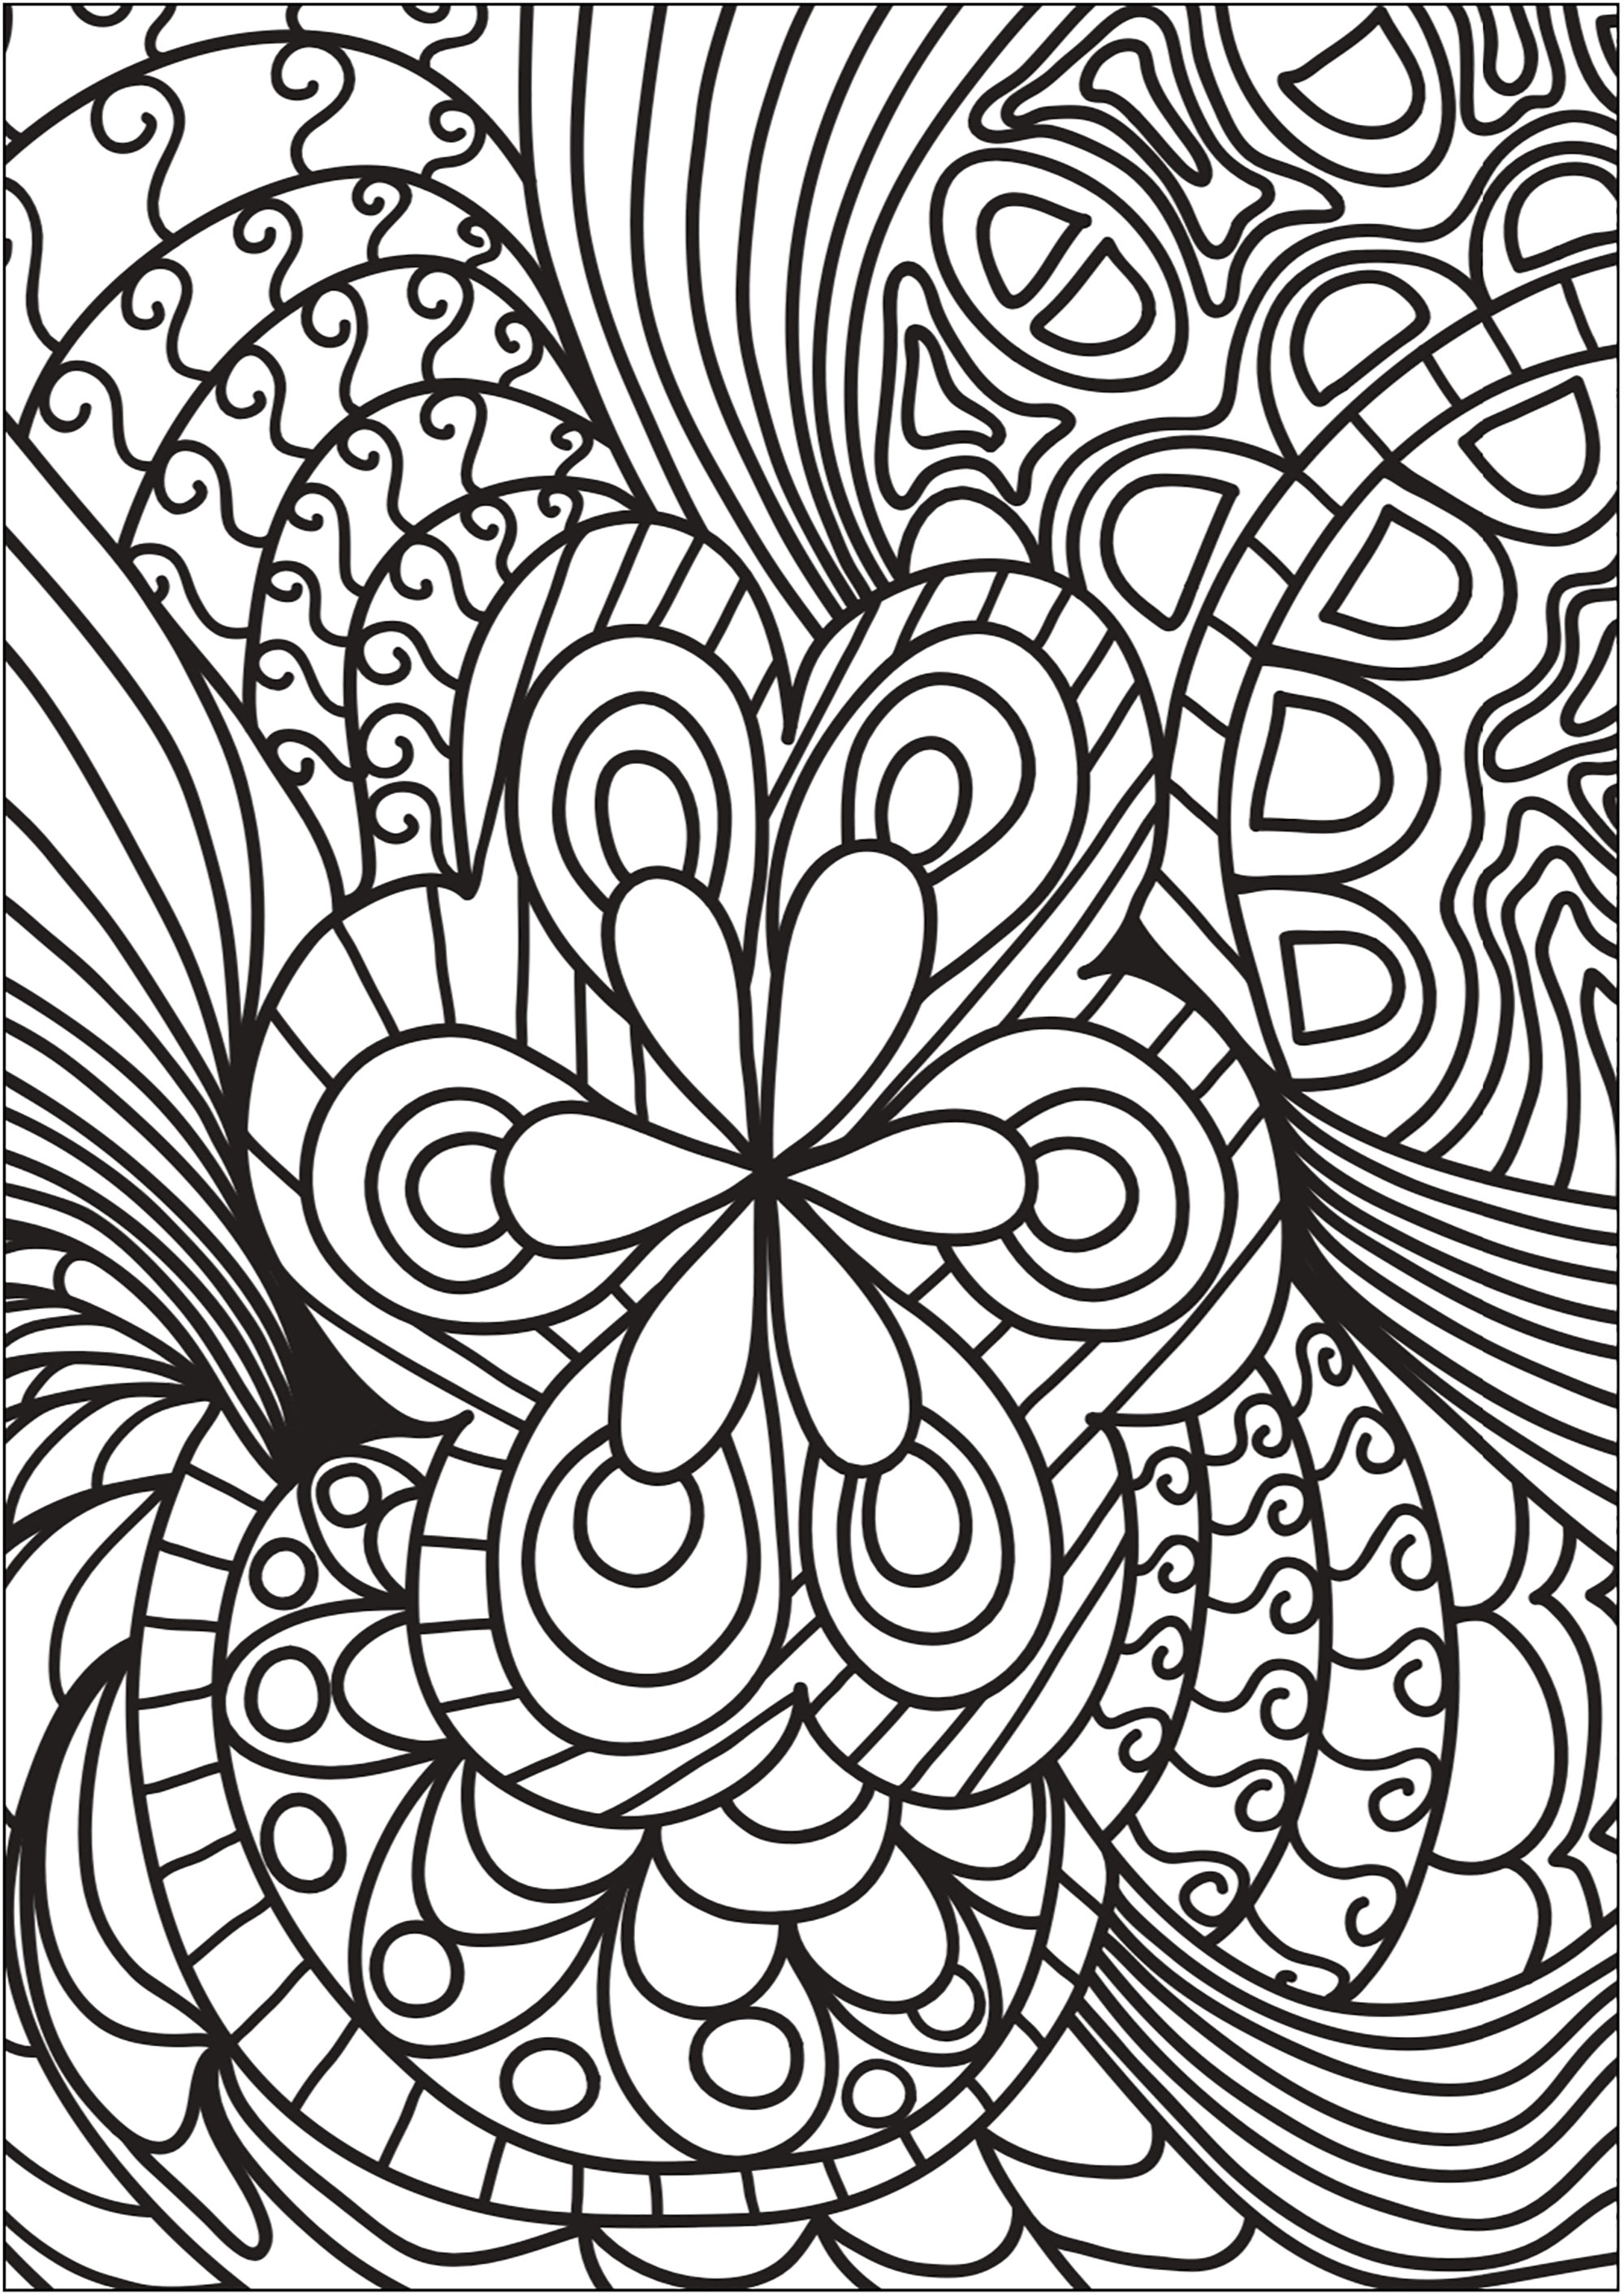 Beautiful Doodle with central flower and surrounding shapes. Start by coloring the flower, then let yourself be carried away in a whirlwind of shapes and colors.